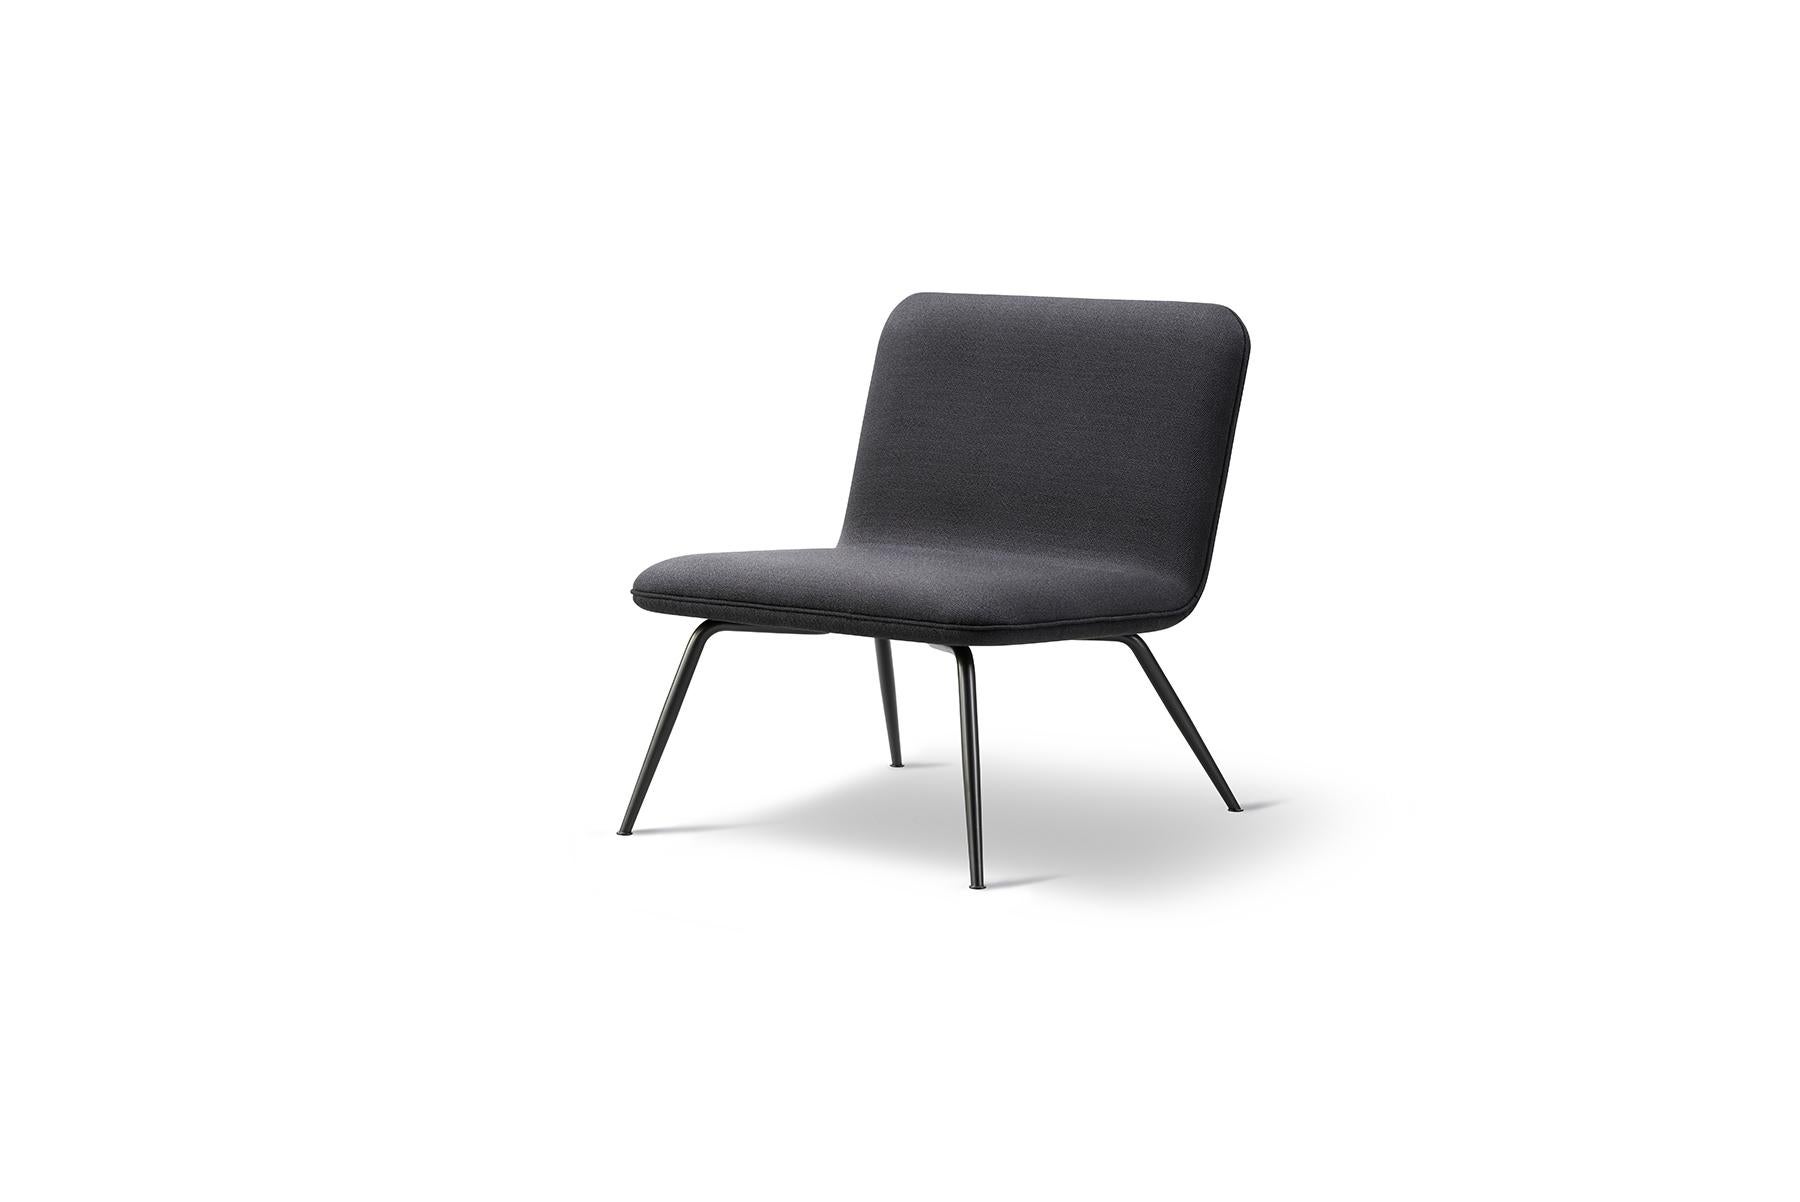 Space Copenhagen spine lounge chair is a light lounge chair for residential homes or open lounge areas. The accented detailing on the fully upholstered seat in either leather or fabric makes the chair as beautiful standing mid-room as it is against